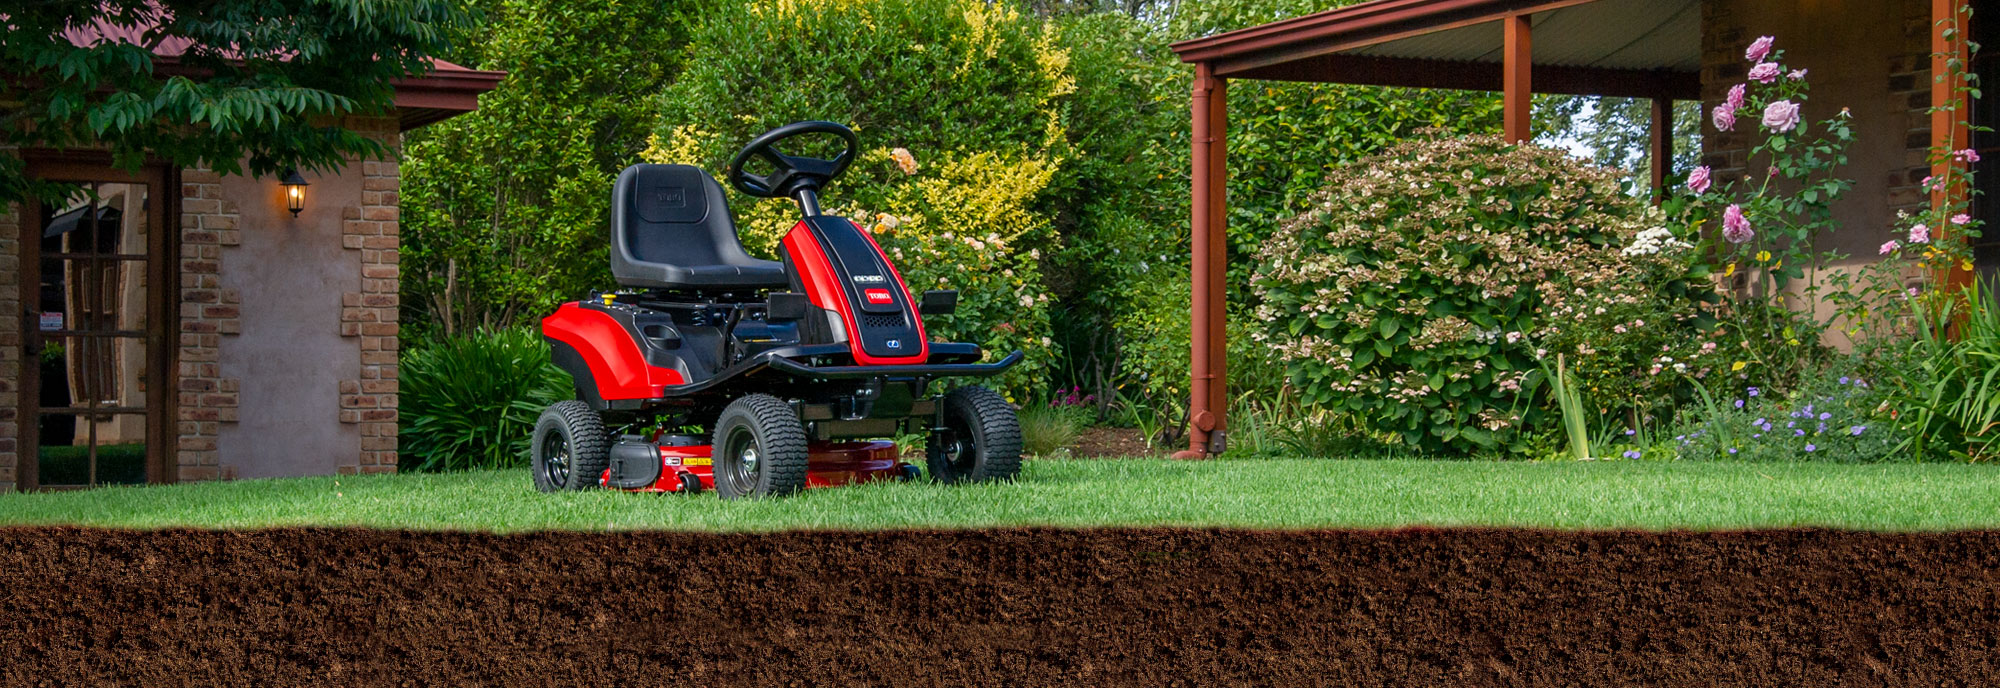 E Series battery powered ride-on mower